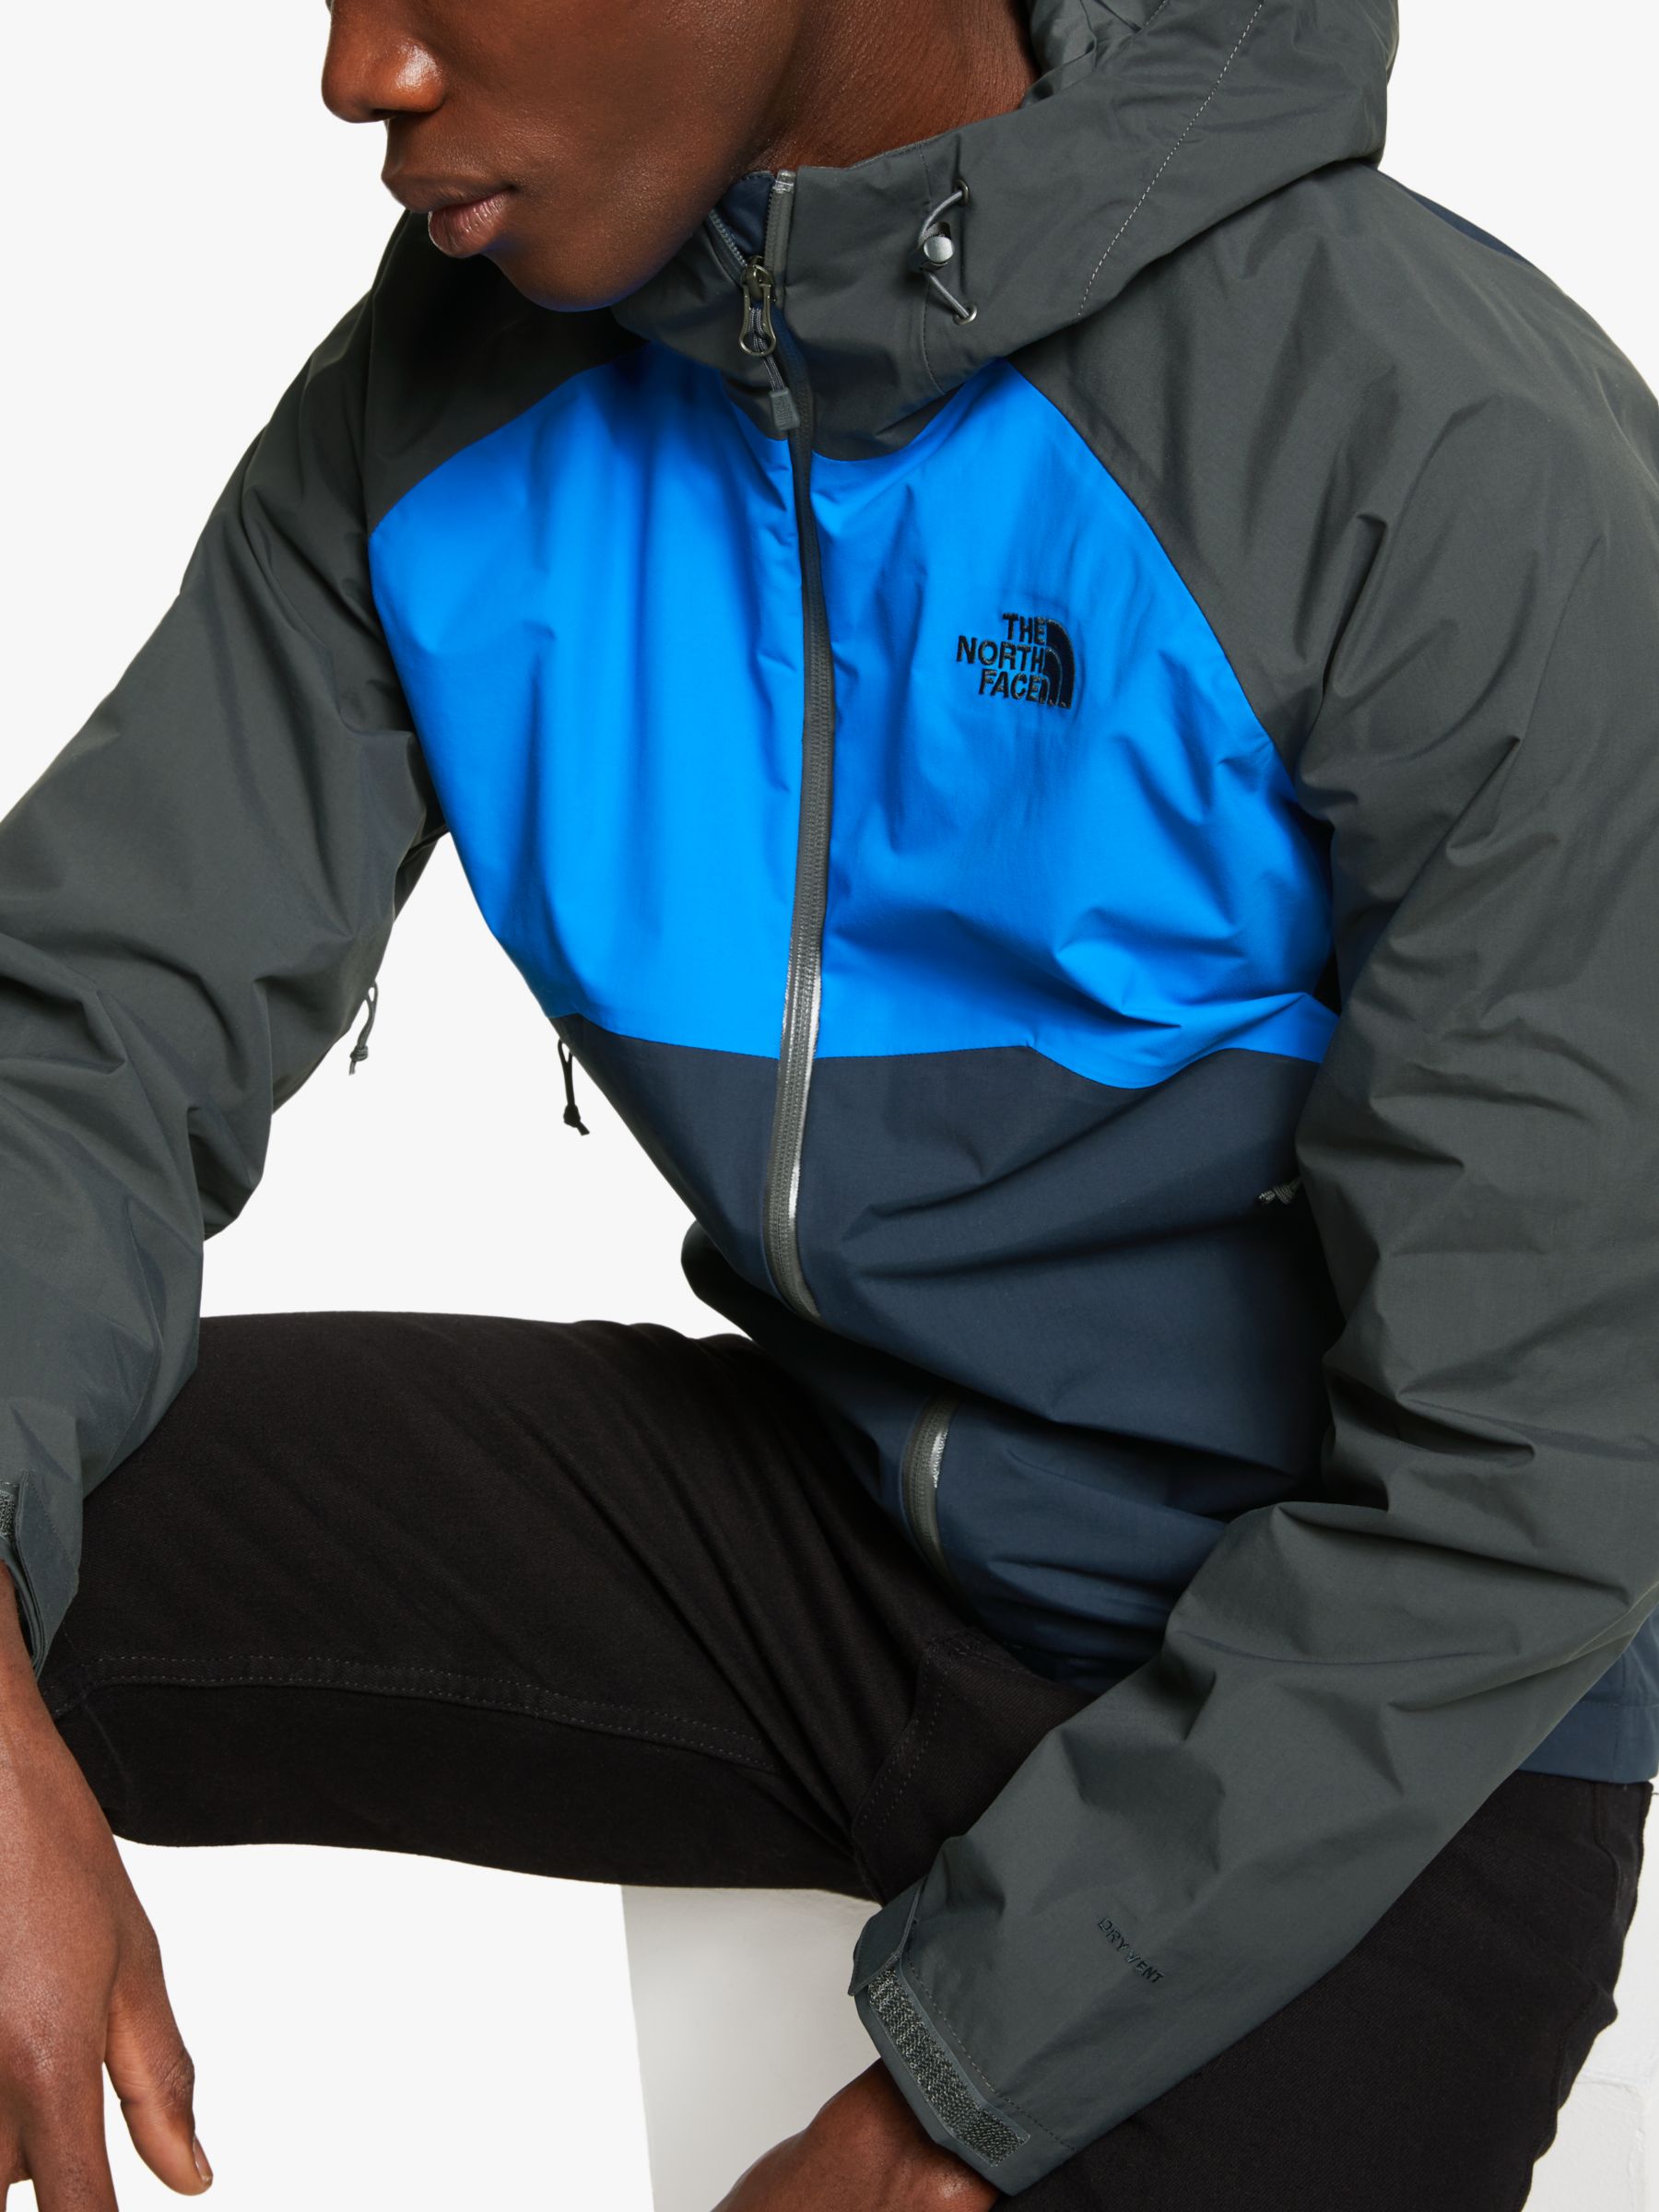 The North Face Stratos Men's Waterproof Jacket